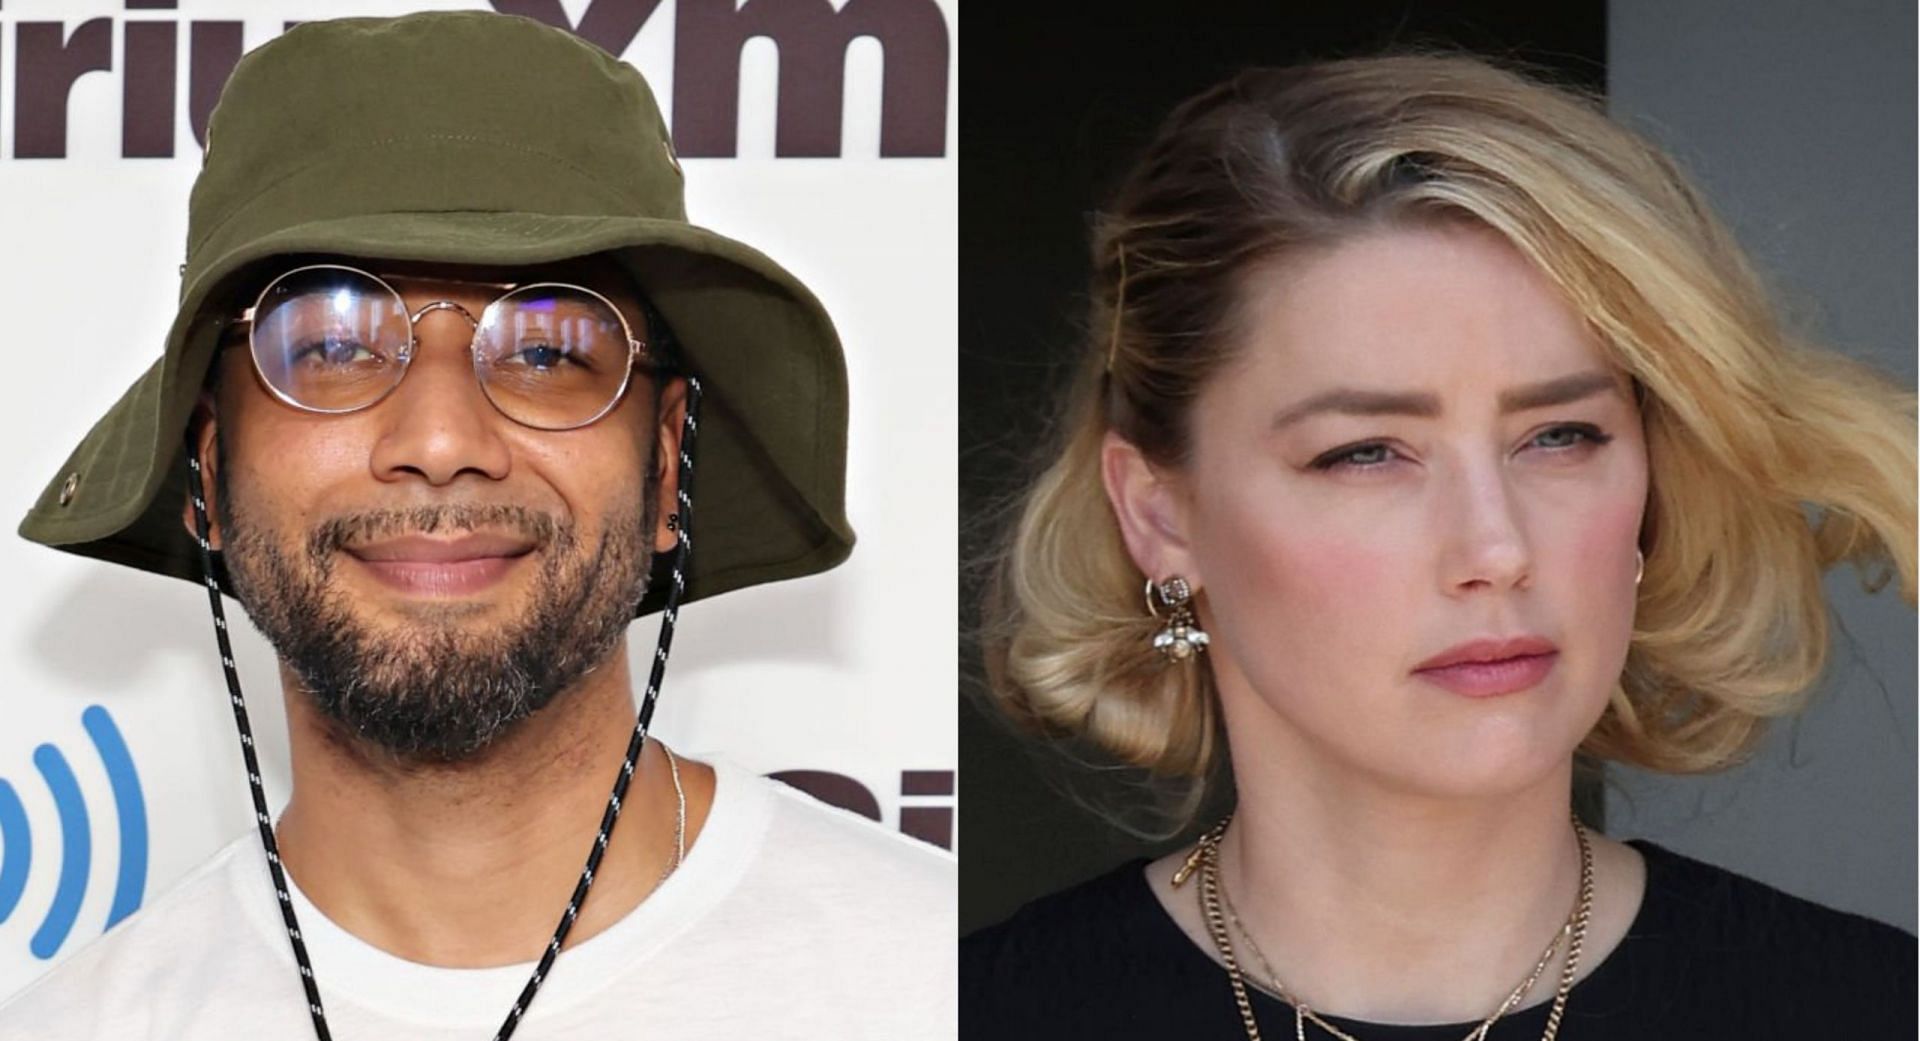 Jussie Smollett was recently compared to Amber Heard for their respective latest interviews (Image via Getty Images)